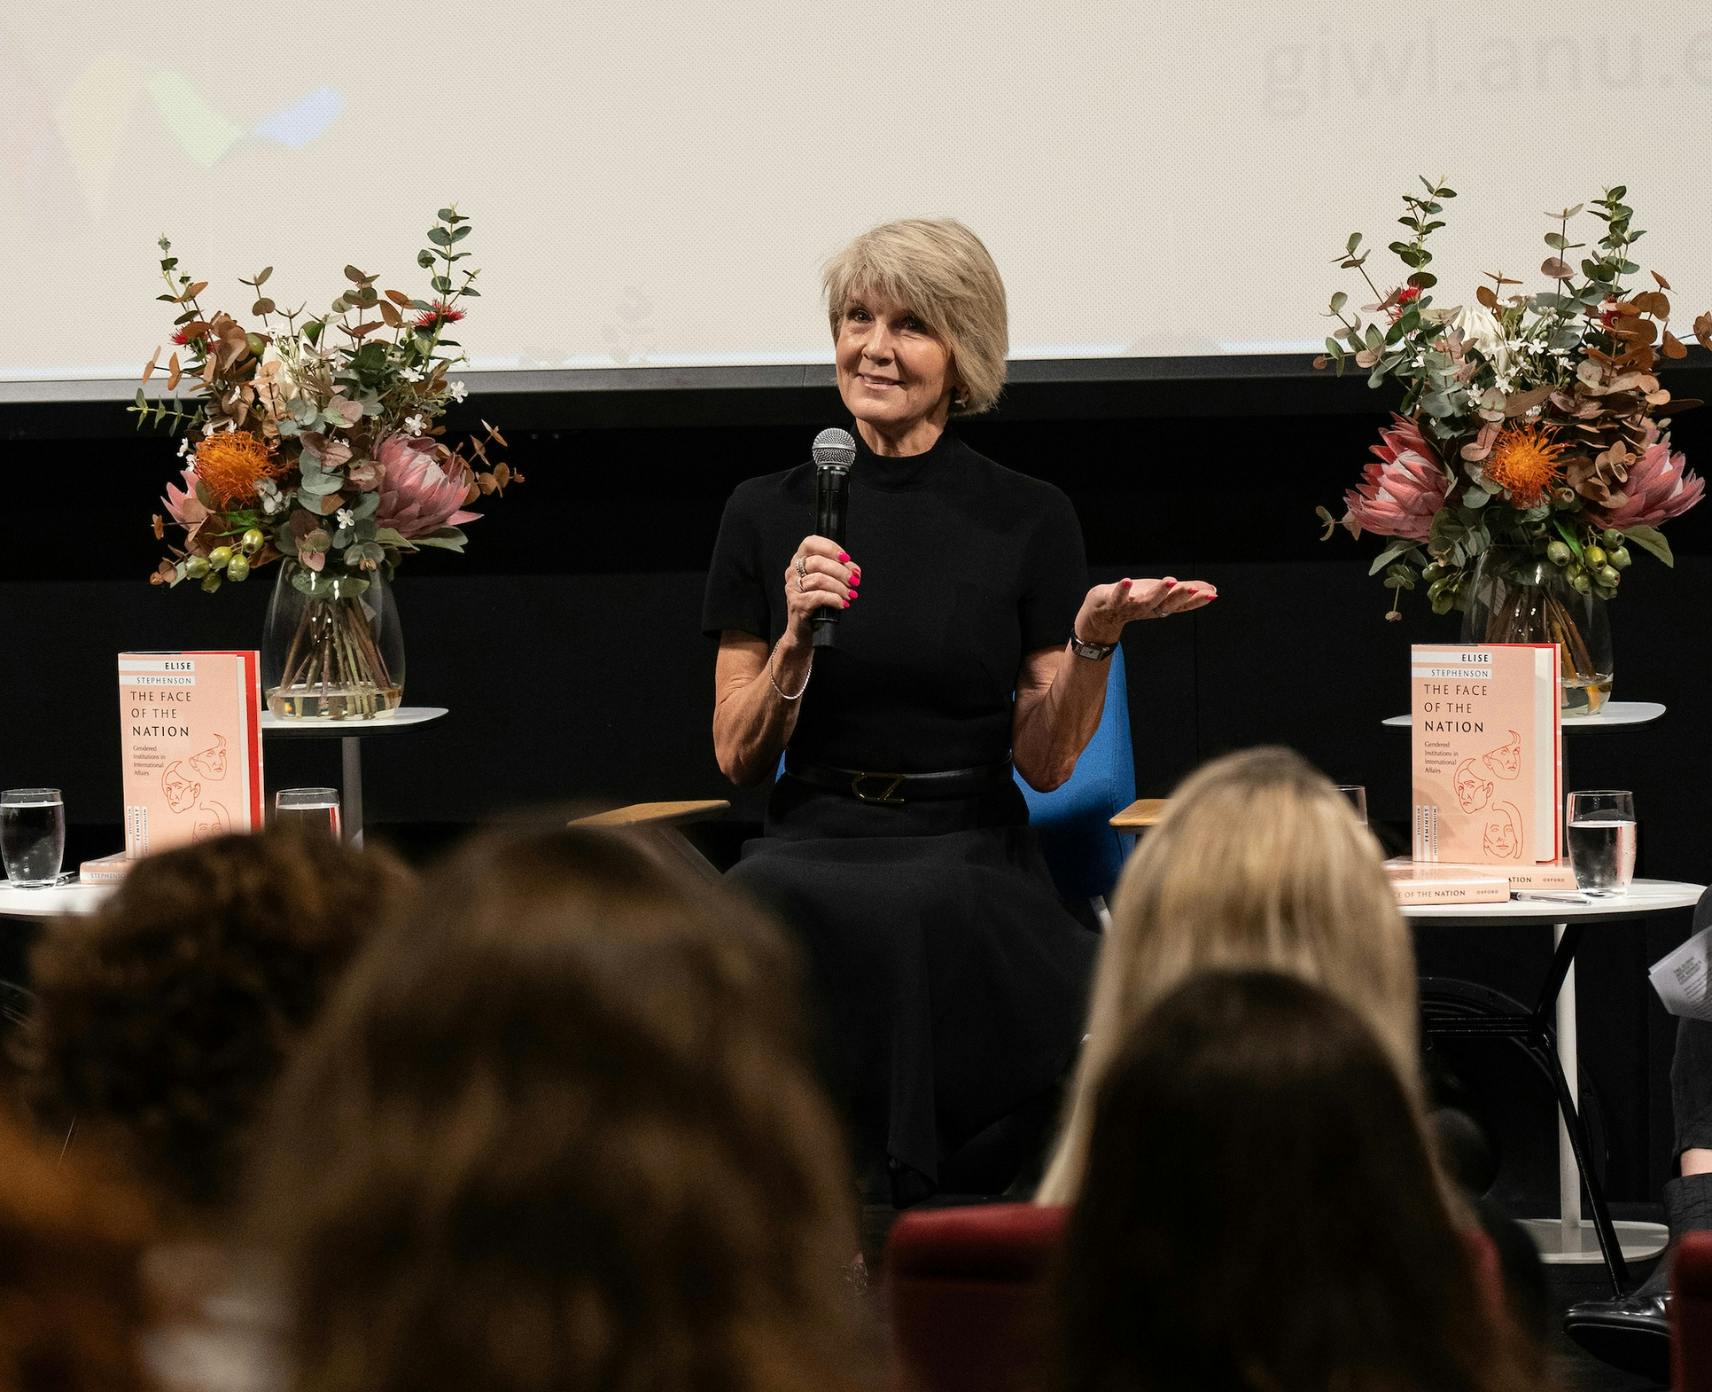 The Hon Julie Bishop speaks at The Face of the Nation book launch